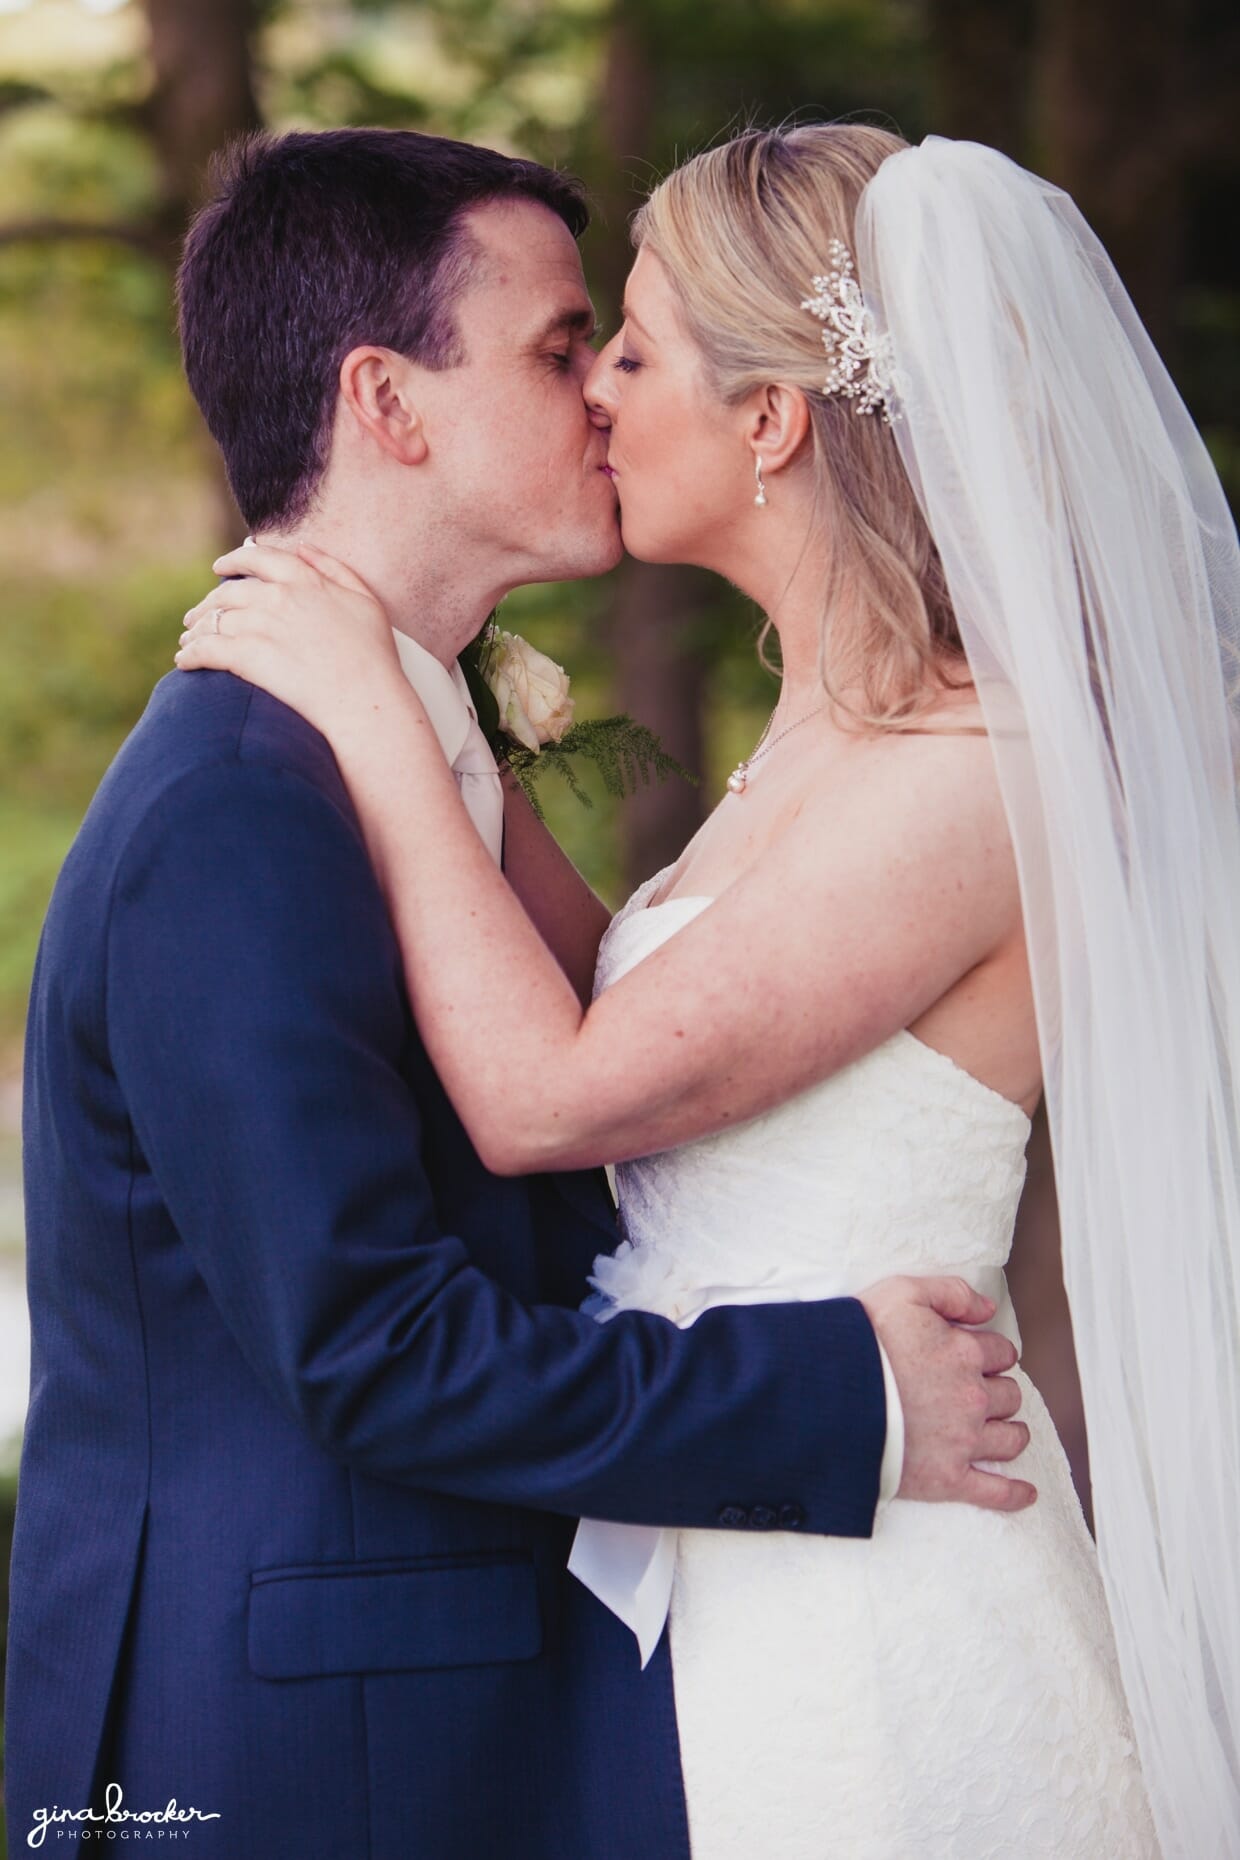 The bride and groom kiss in the woods after their beautiful wedding ceremony